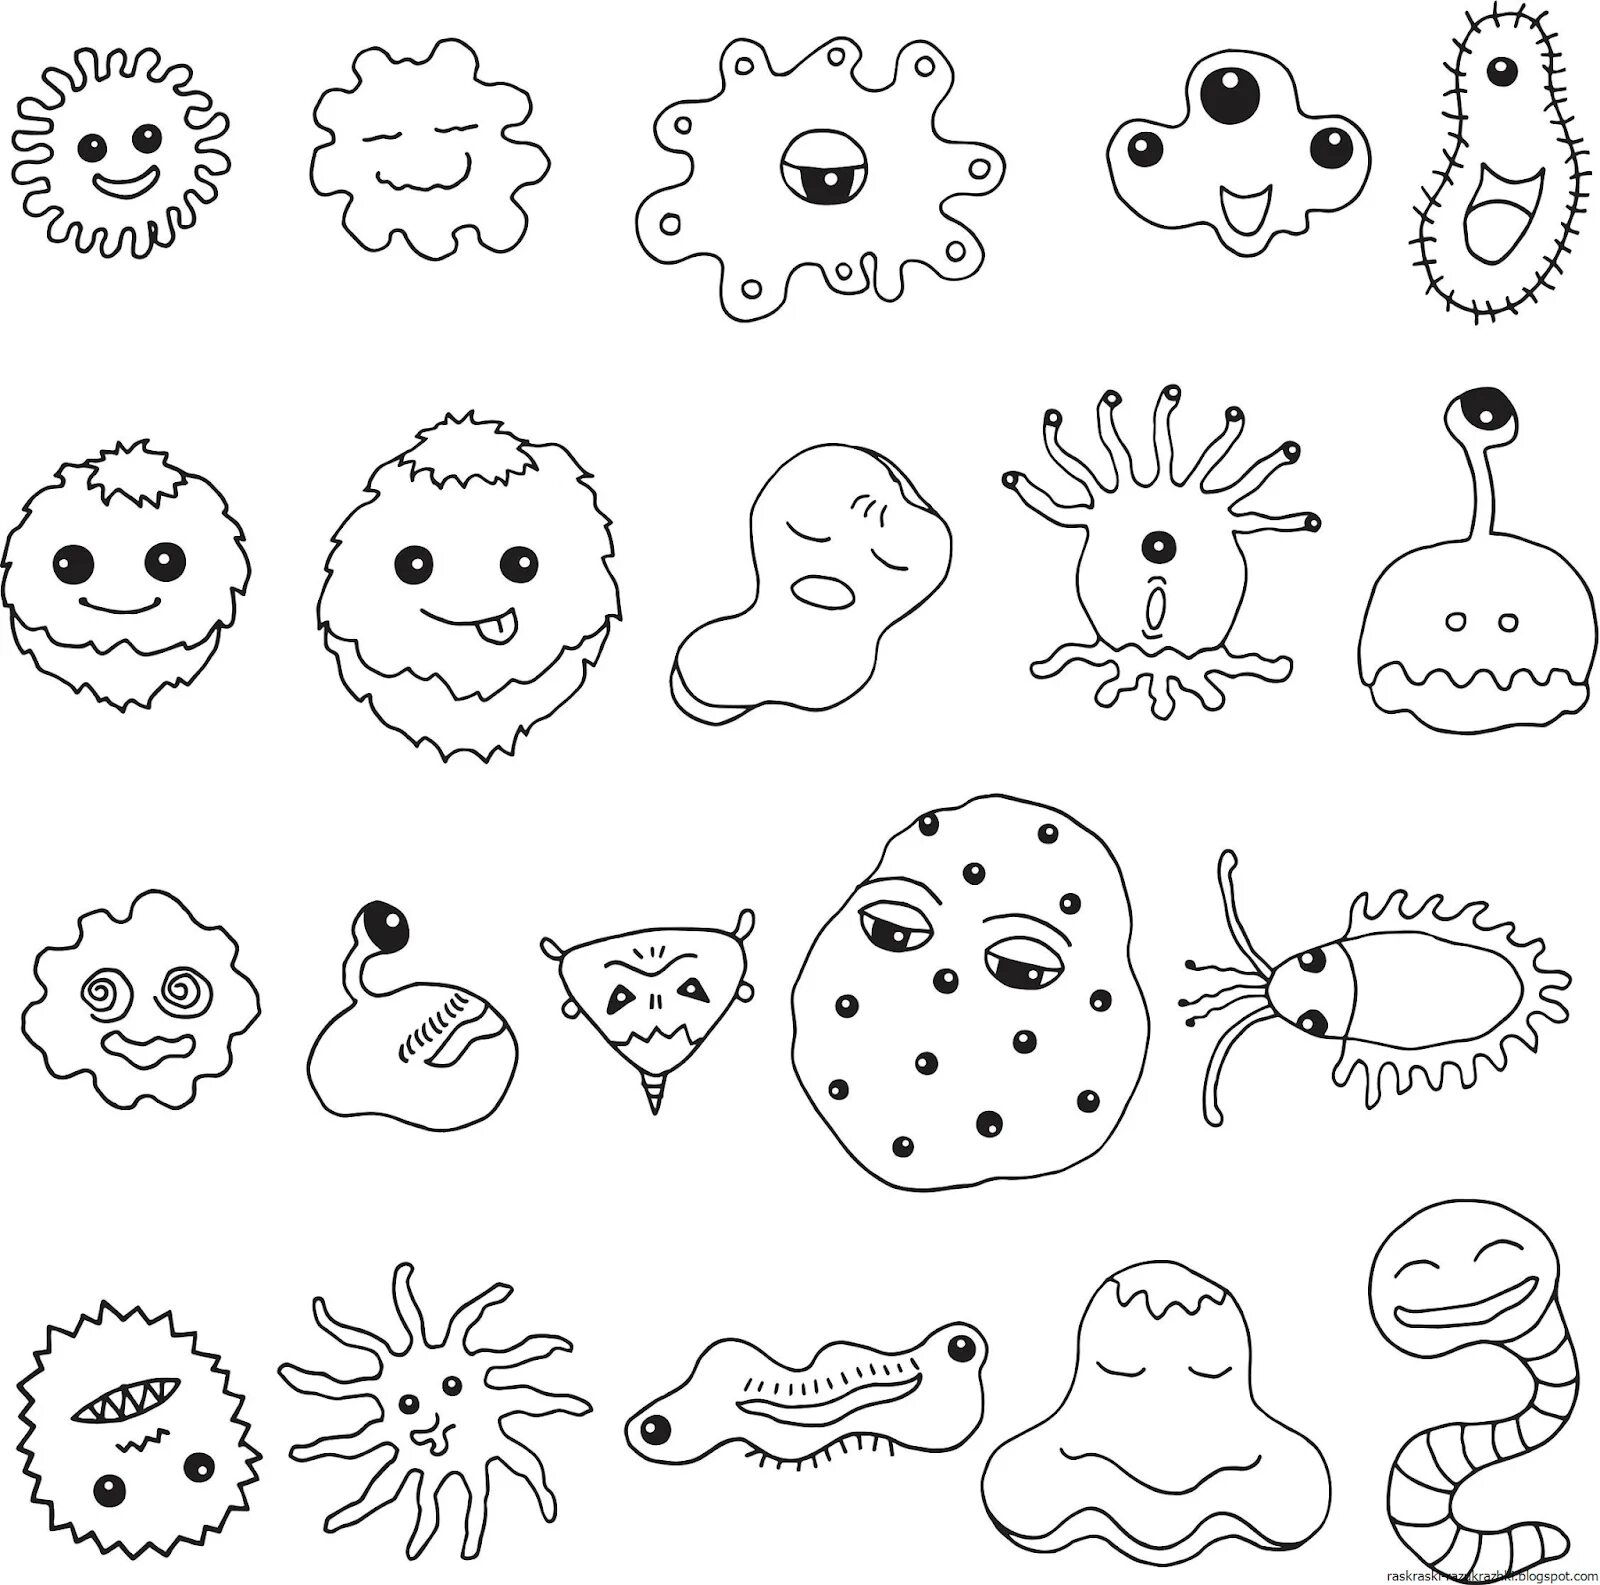 Cognitive coloring of microbes and bacteria